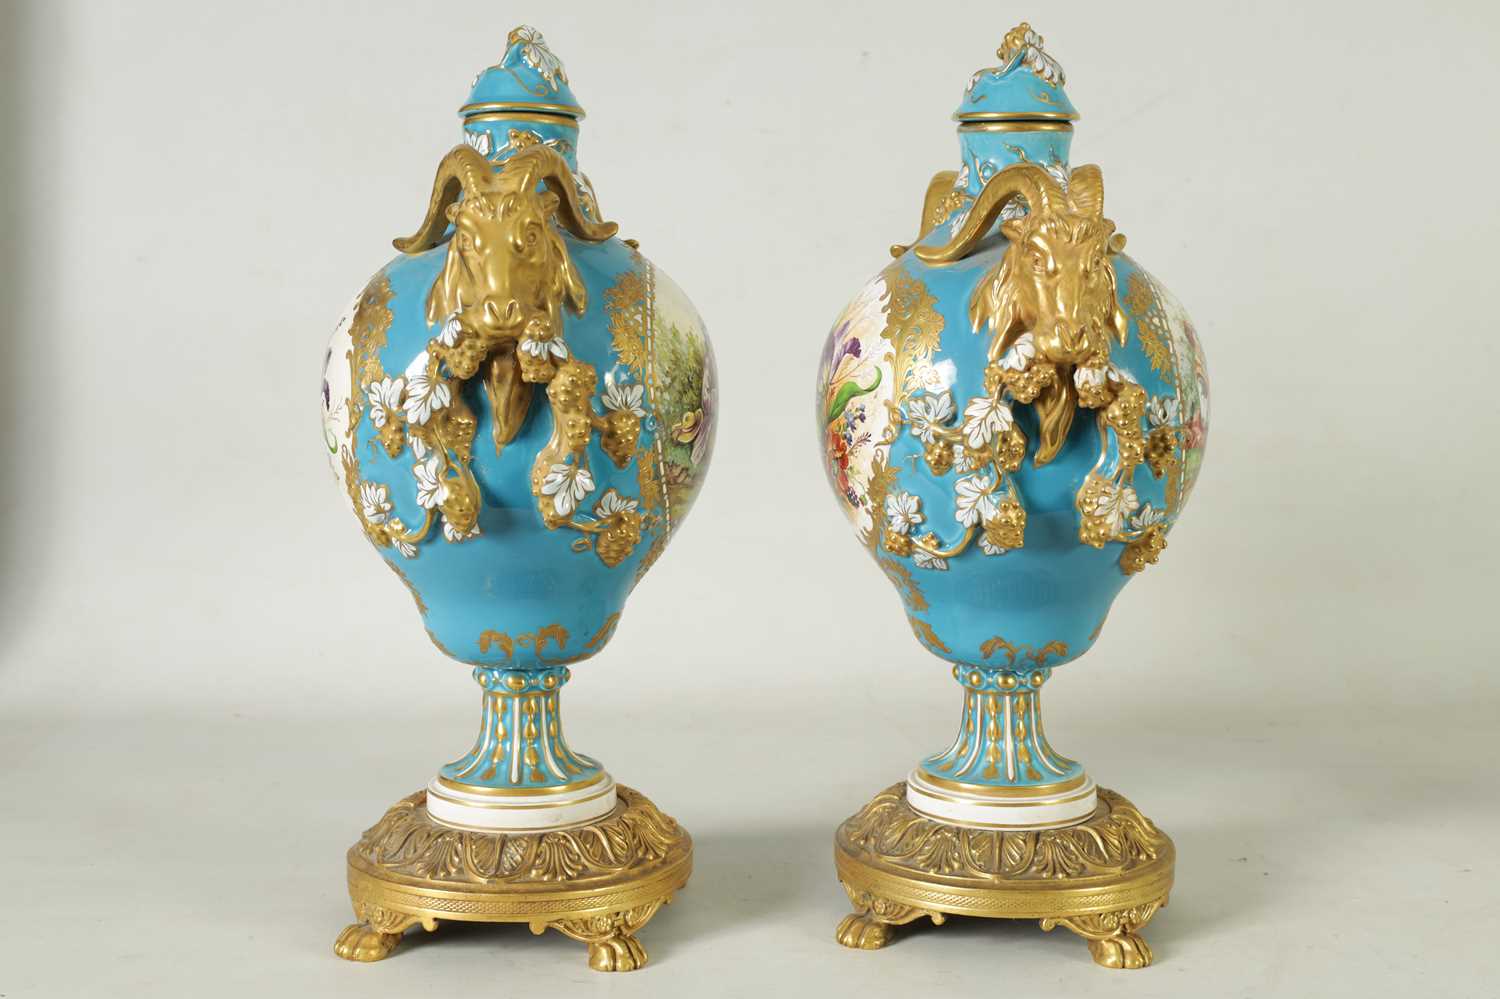 A PAIR OF 19TH CENTURY SEVRES STYLE ORMOLU MOUNTED VASES AND COVERS - Image 5 of 11